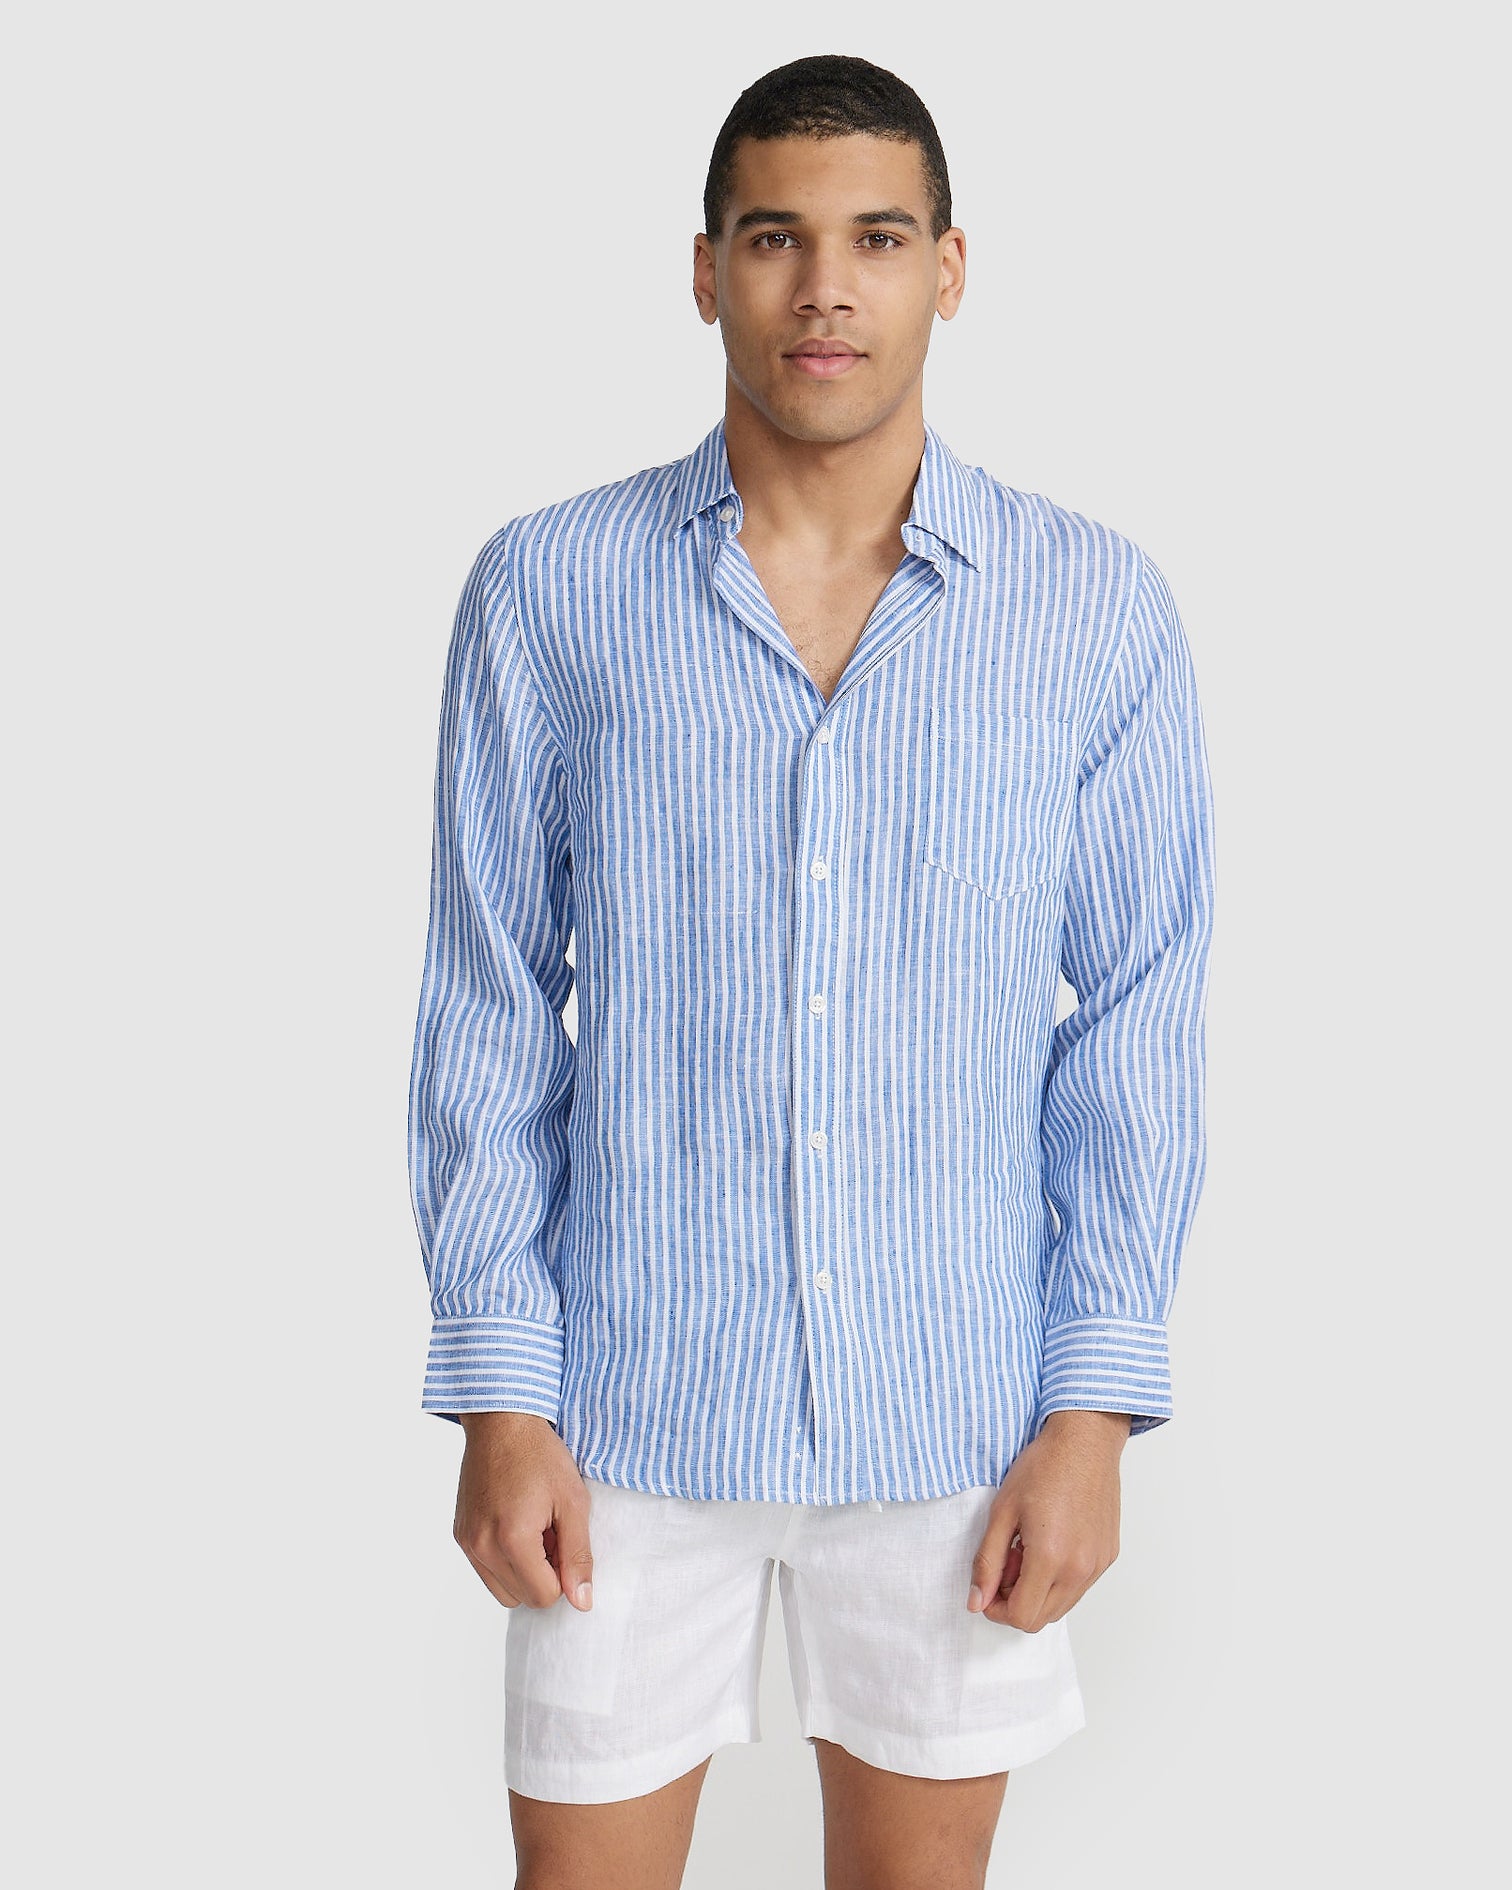 ORTC - Linen Shirt - Blue and White Stripe | Label A